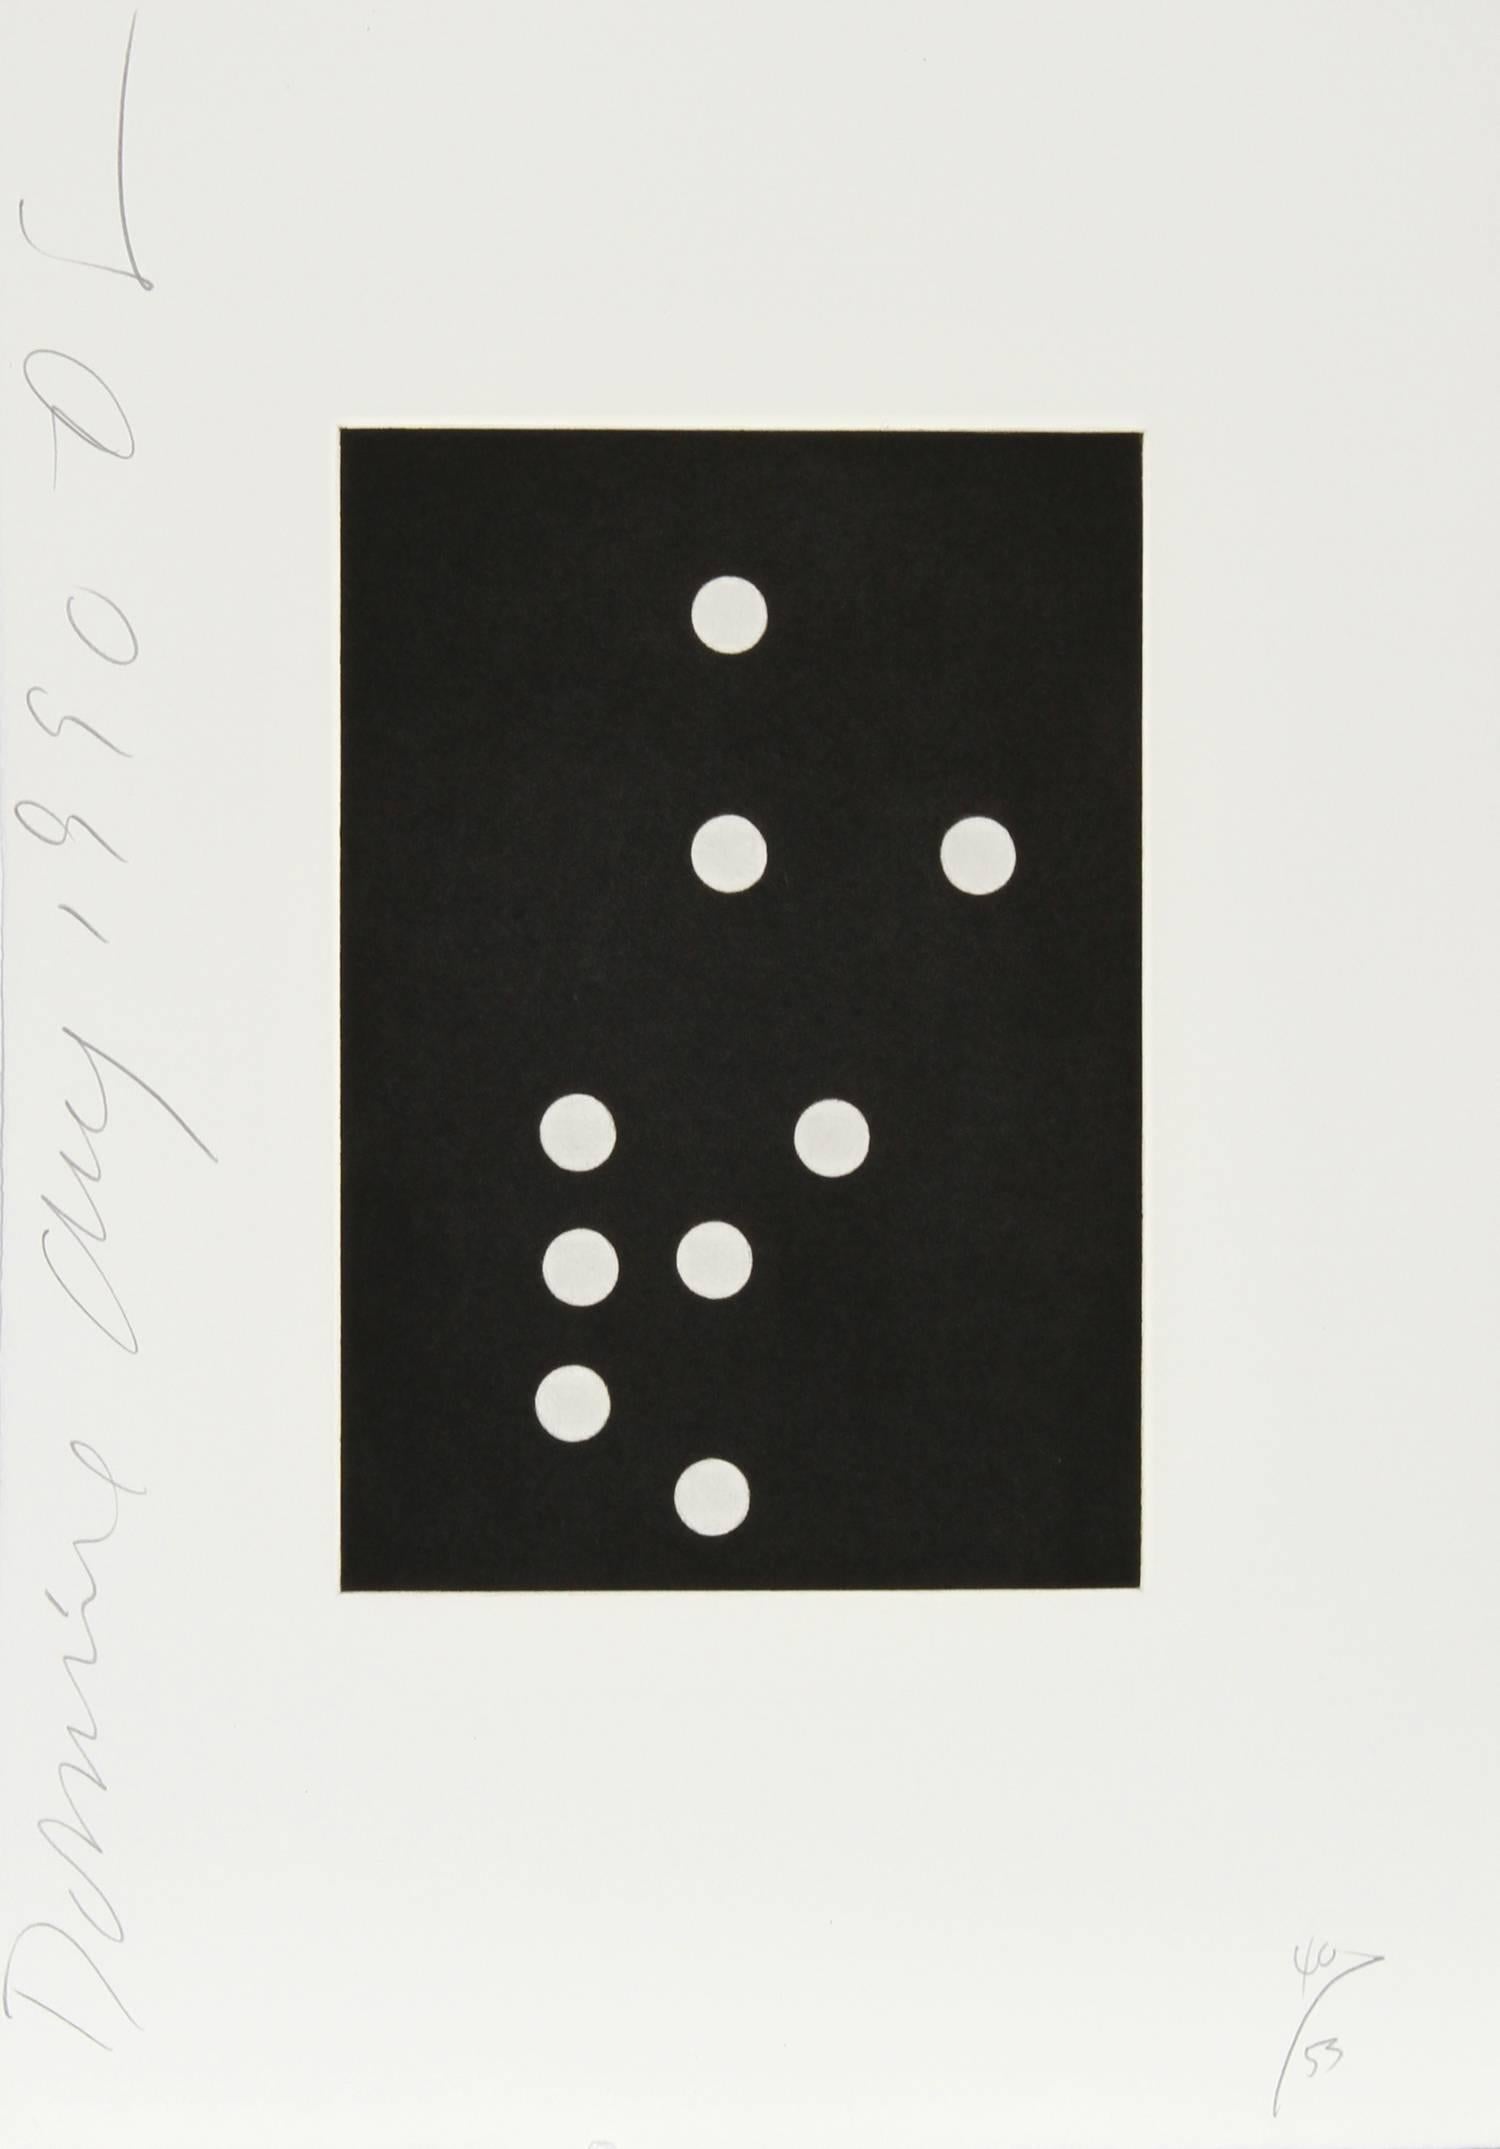 Donald Sultan Abstract Print - 25 from the Dominoes Portfolio, Aquatint Etching, 1990